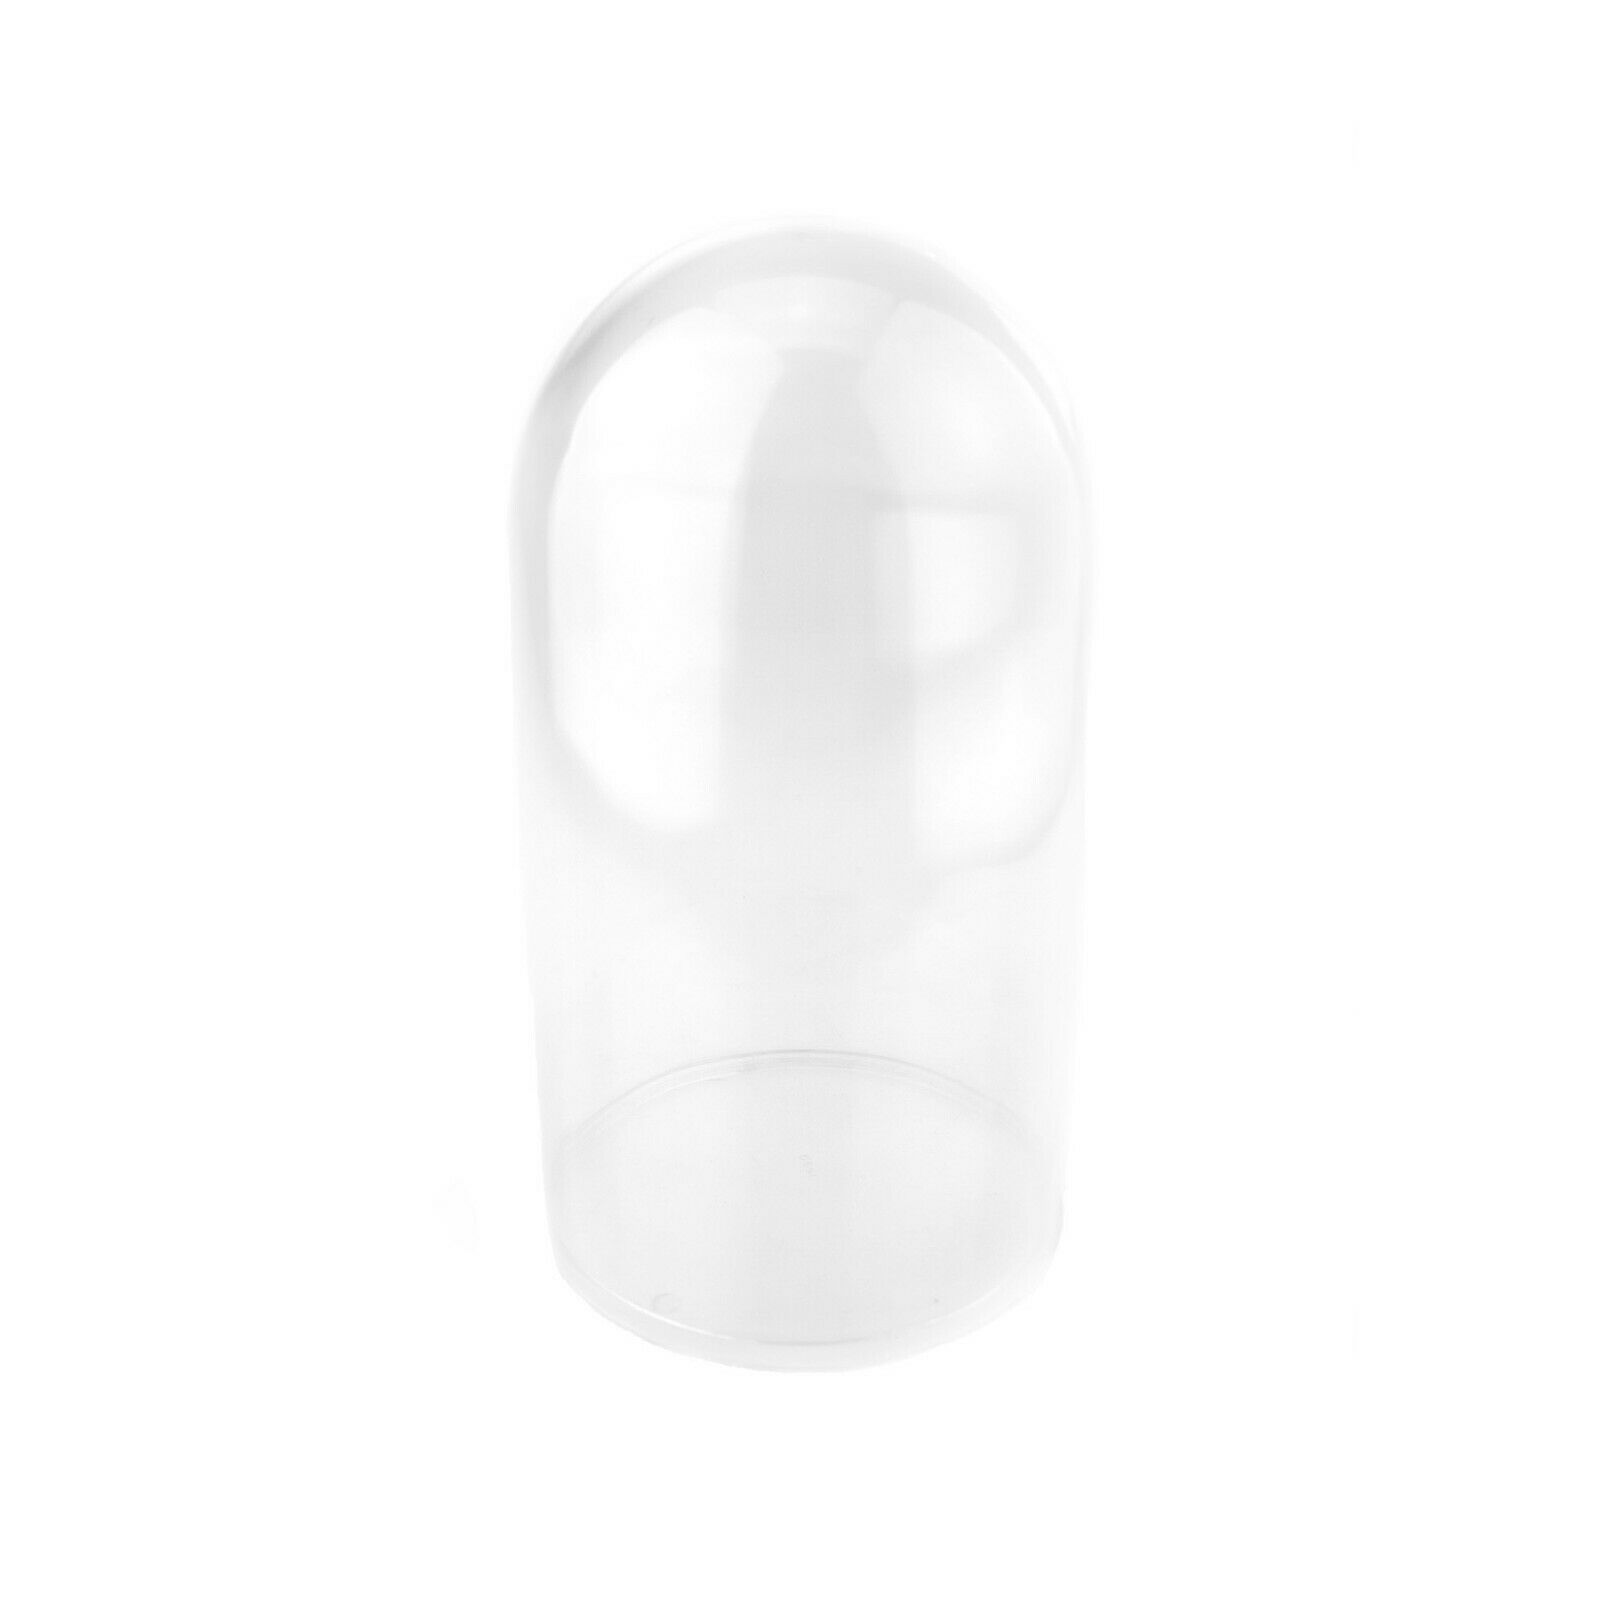 Clear Plastic Dome Case Display Centerpiece 3.75", 5.375", 6.875"